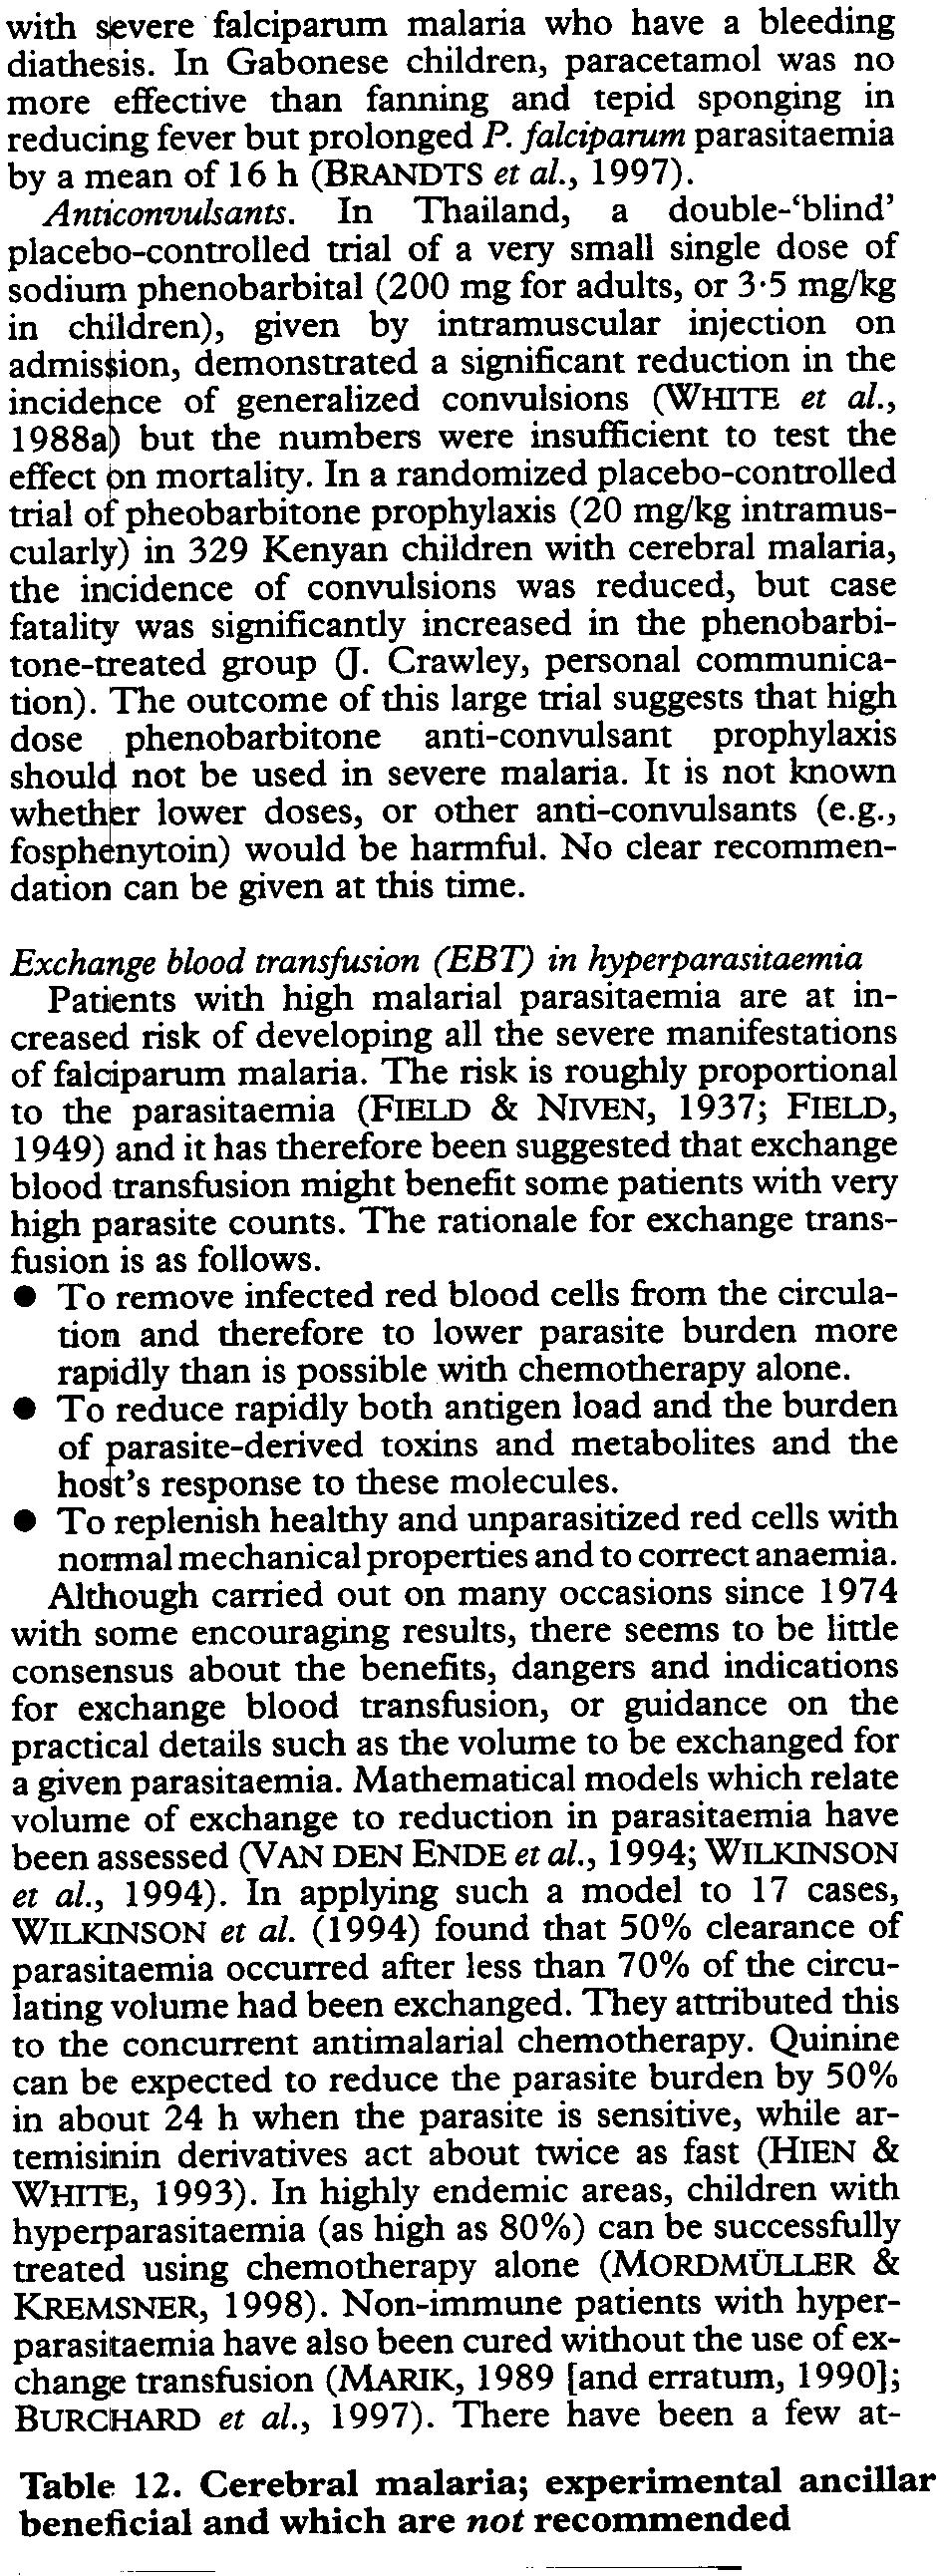 TRANSACTIONS OF THE ROYAL SOCIETY OF TROPICAL MEDICINE AND HYGIENE (2000) 94, SUPPLEMENT 51/41 with *vere falciparum malaria who have a bleeding diathesis.